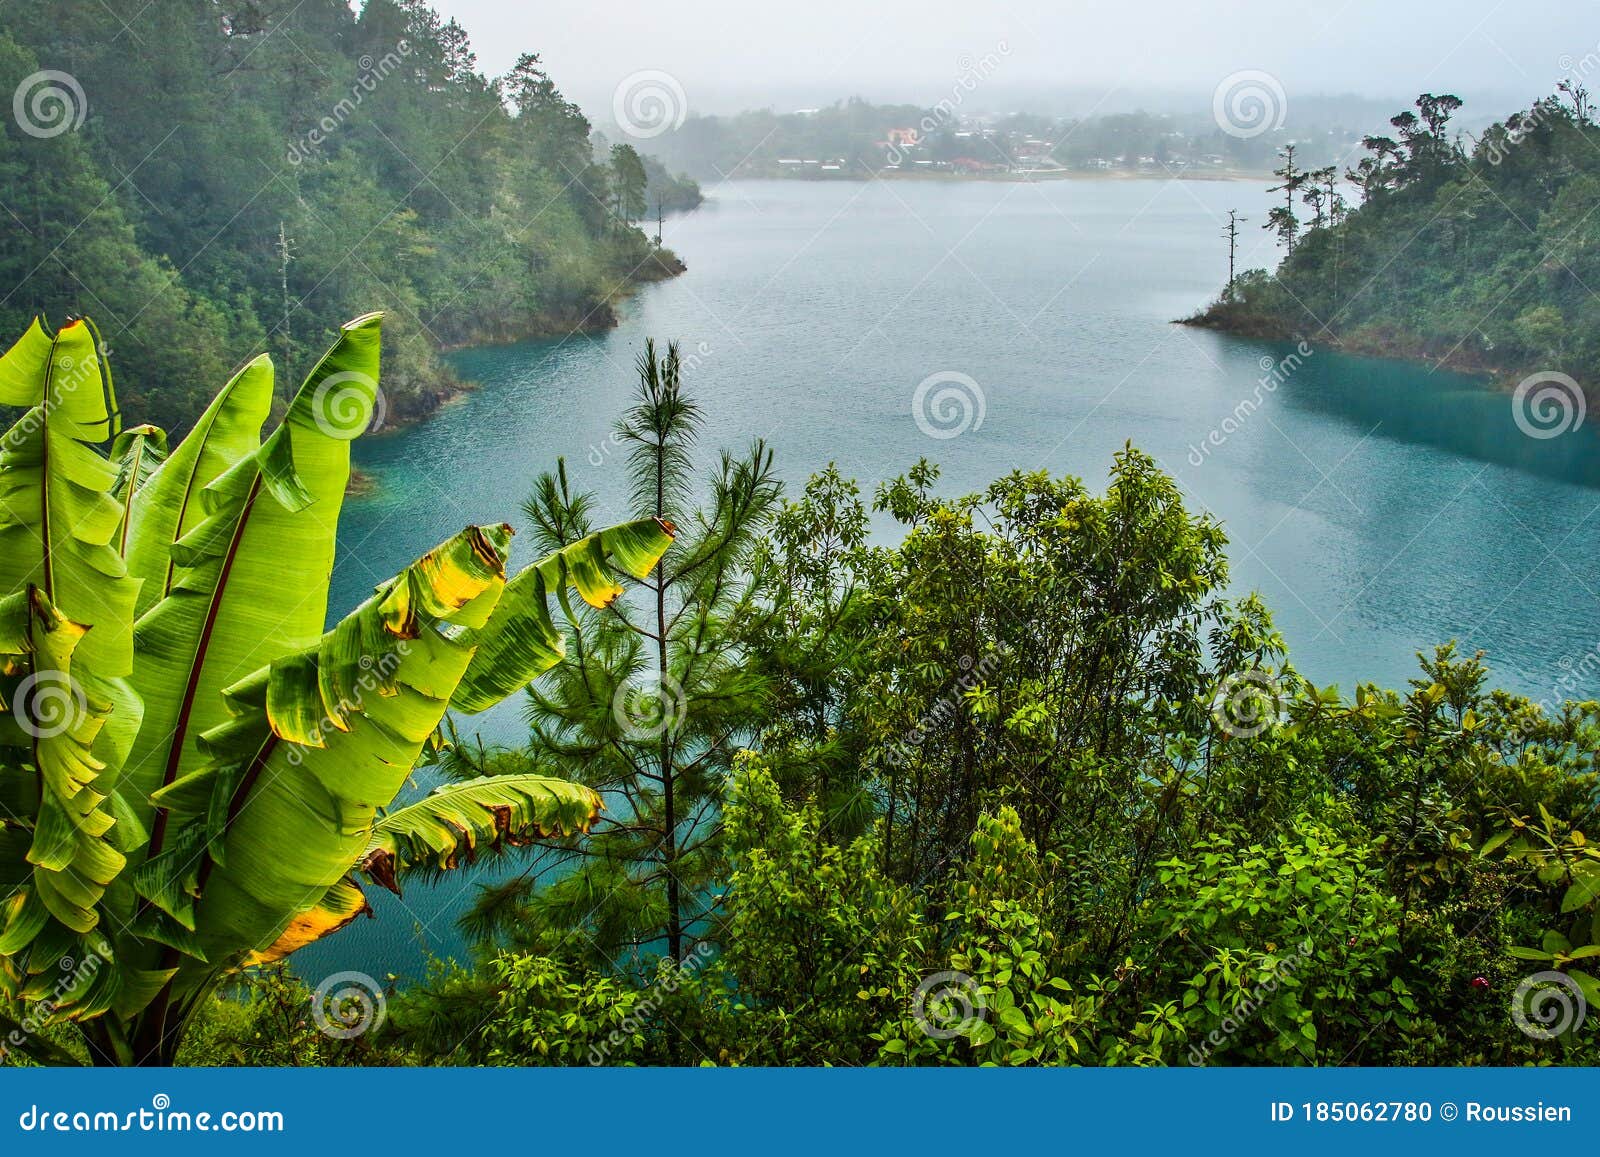 montebello lake on the border of mexico and belize in cloudy day